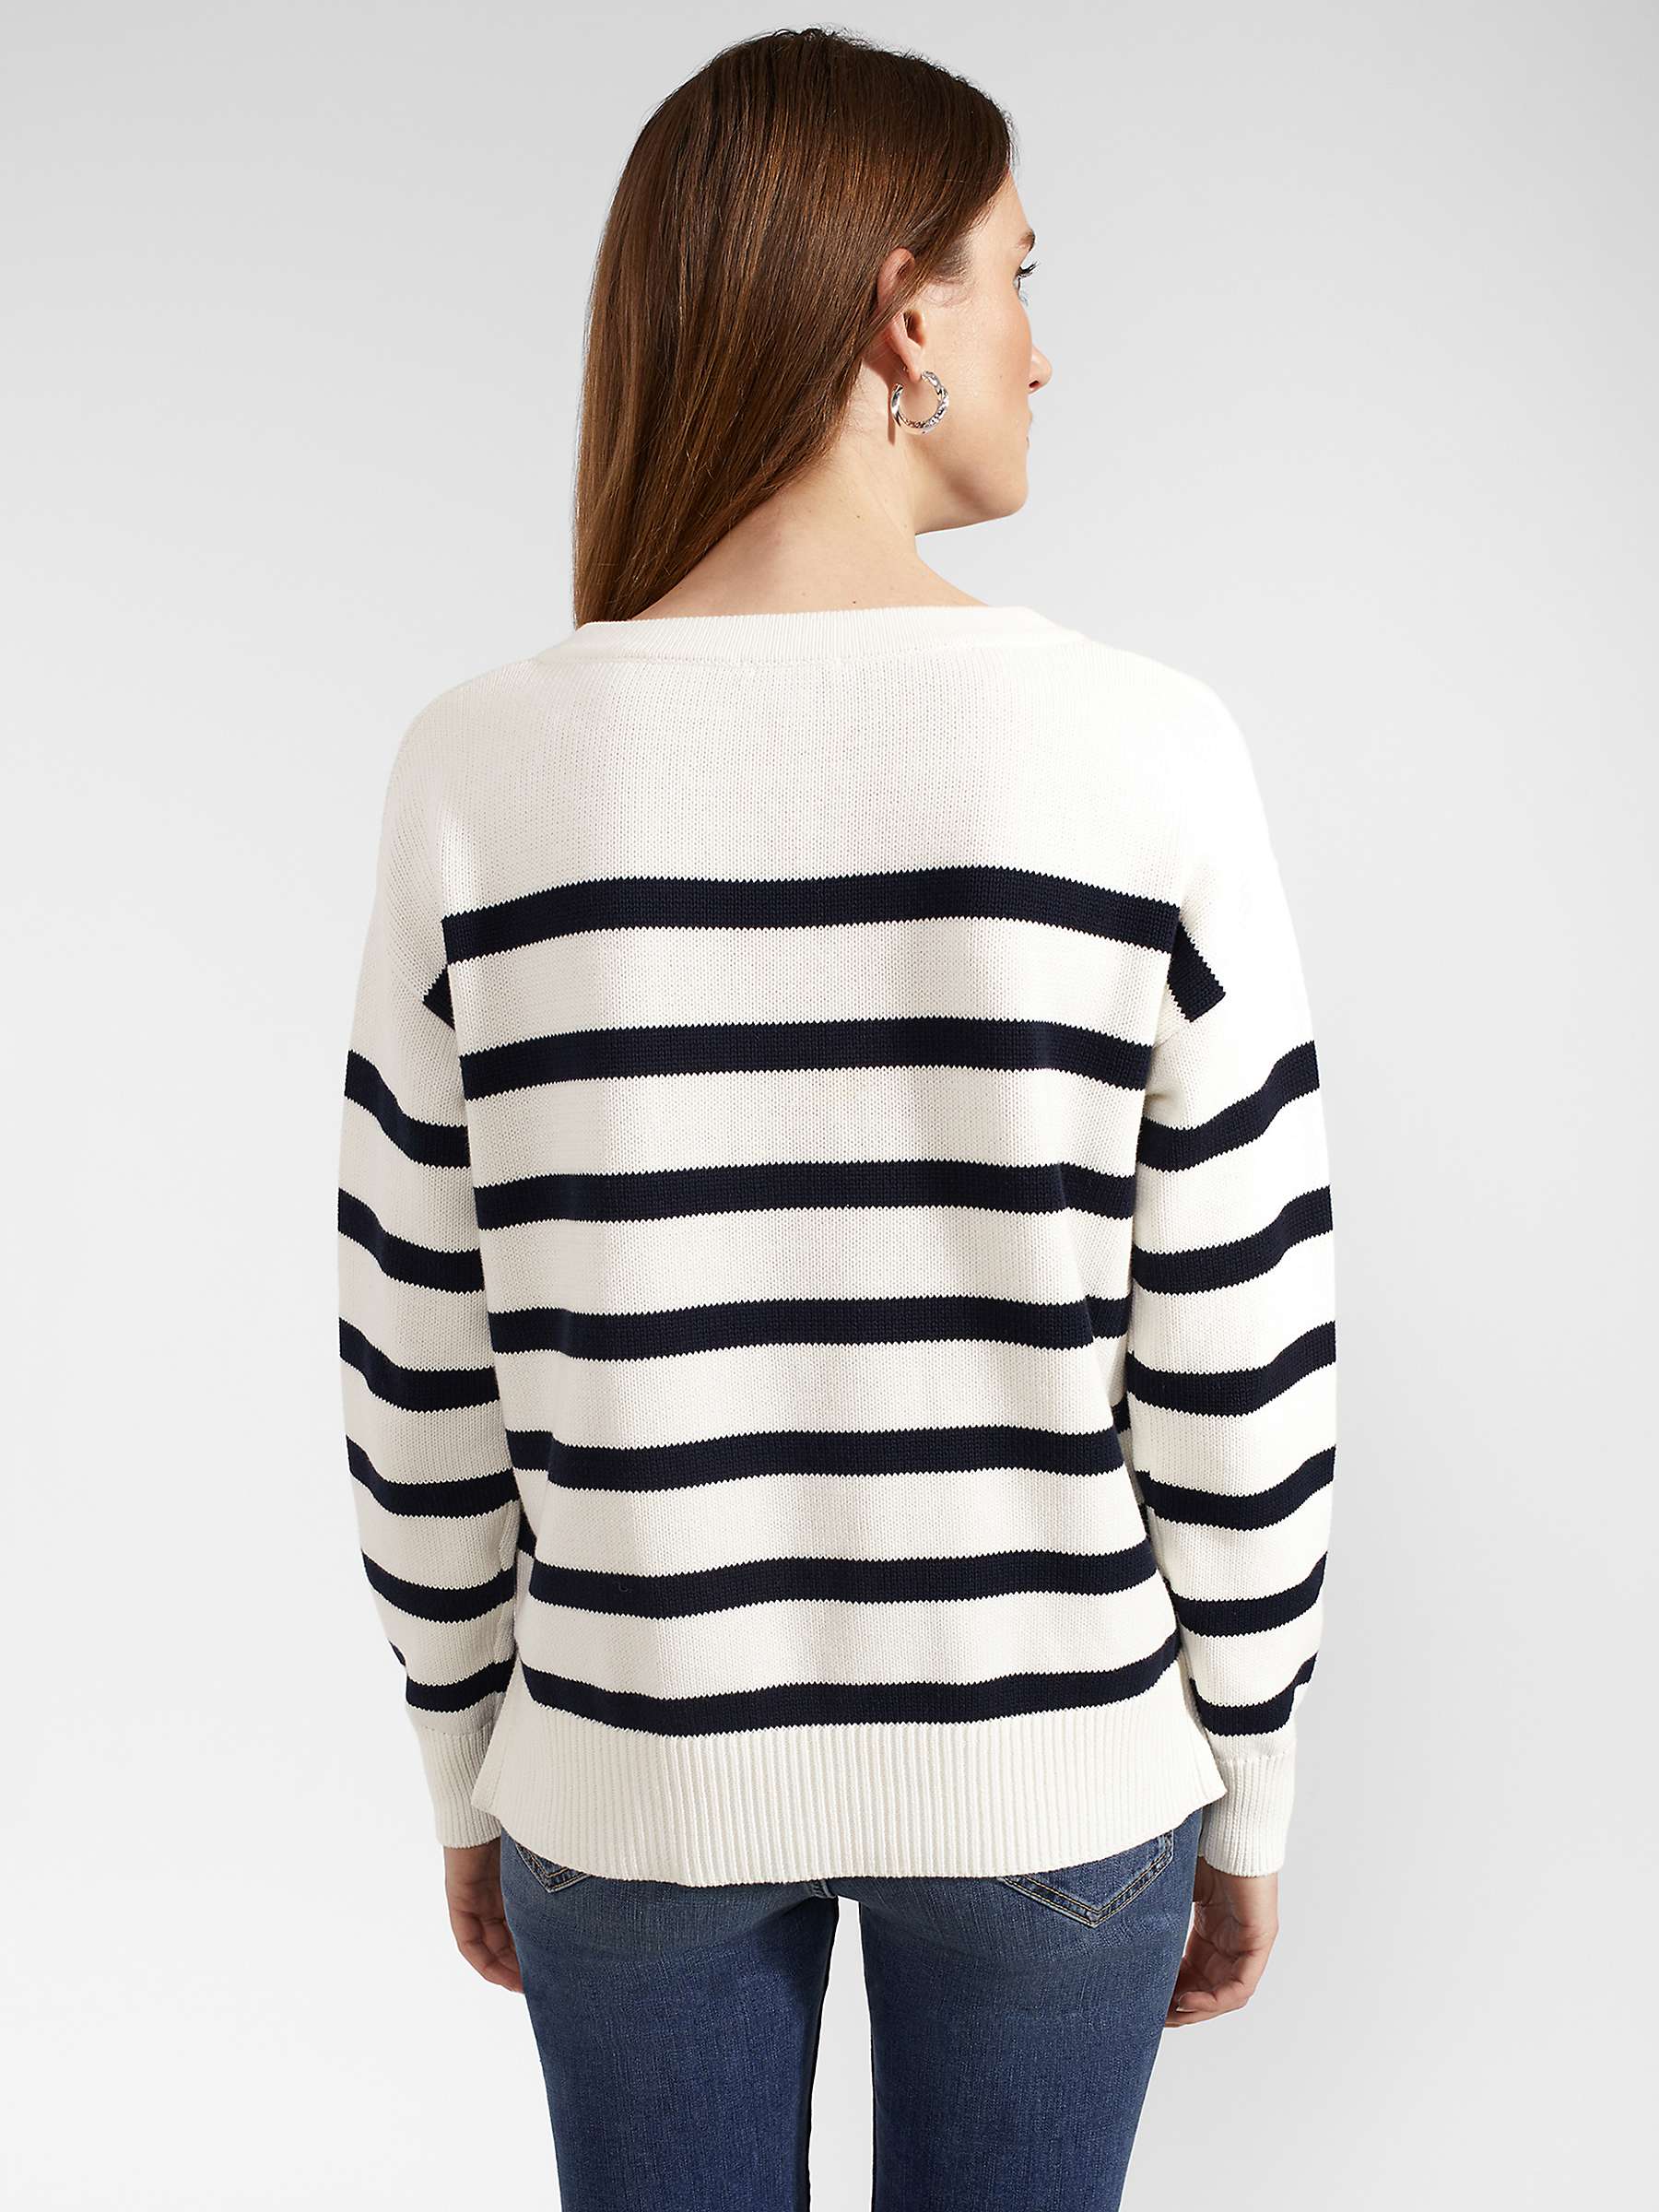 Buy Hobbs Danica Striped Cotton Lace-Up Neck Jumper, Ivory/Navy Online at johnlewis.com